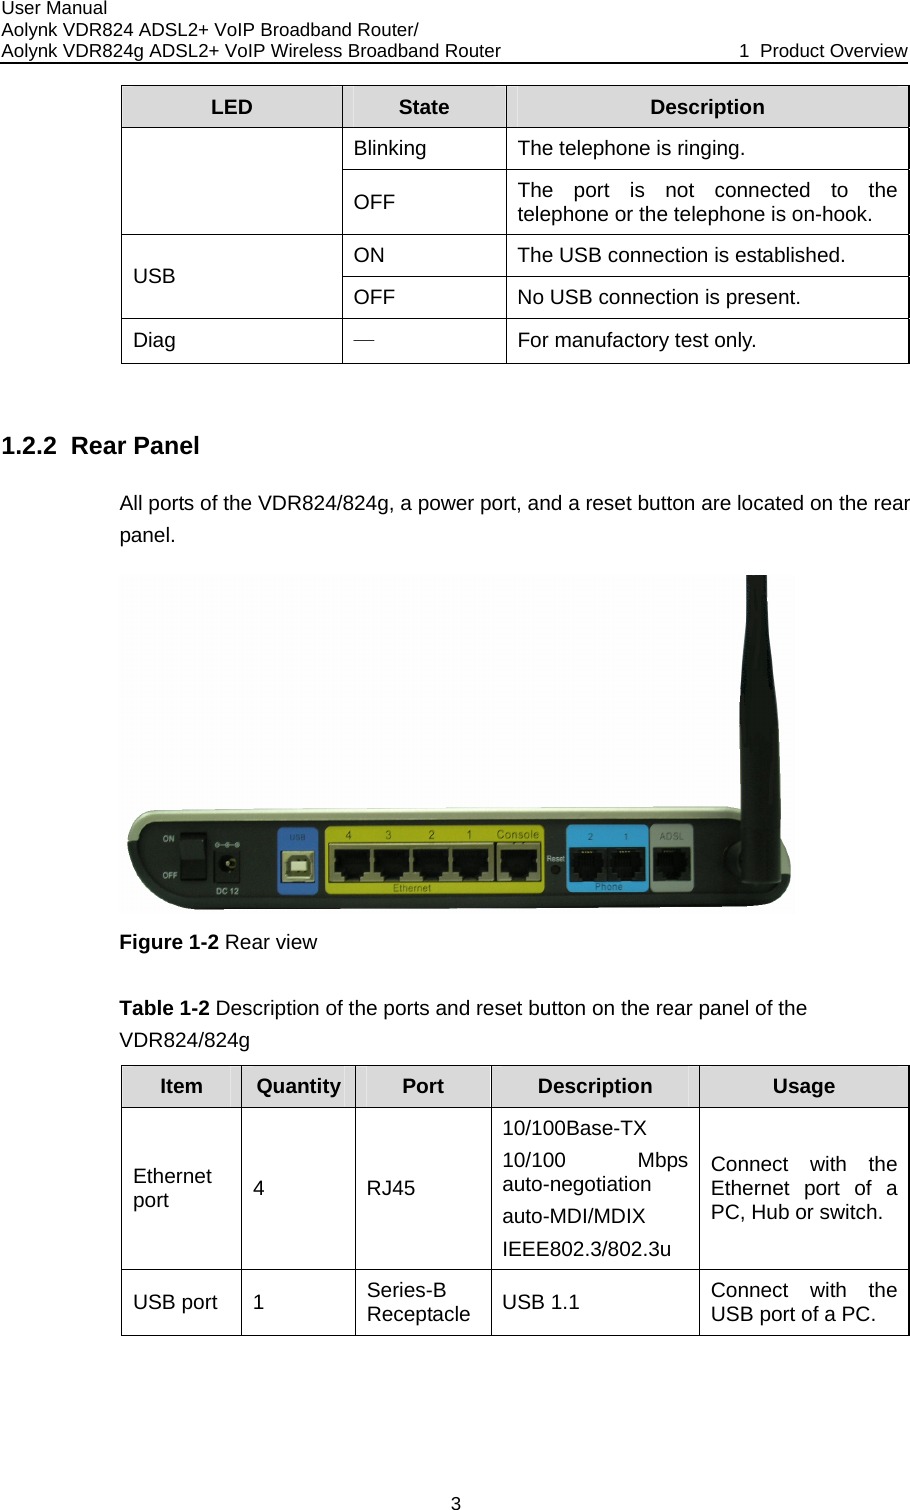 User Manual Aolynk VDR824 ADSL2+ VoIP Broadband Router/ Aolynk VDR824g ADSL2+ VoIP Wireless Broadband Router  1  Product Overview 3 LED State Description Blinking  The telephone is ringing.   to the telephone or the telephone is on-hook. OFF  The port is not connectedON  The USB connection is established. USB  OFF  No USB connection is present. Diag  — For manufactory test only.  1.2.2  Rear Panel d on the rear All ports of the VDR824/824g, a power port, and a reset button are locatepanel.   Figure 1-2 Rear view Table 1-2 Description of the ports and re ear panel of the VDR824/824g set button on the rItem Quantity  Port  Description  Usage Ethernet  10/100 Mbps auto-MDI/MDIX  IEEE802.3/802.3u port 4 RJ45 10/100Base-TX auto-negotiation  Connect with the Ethernet port of a PC, Hub or switch. USB port  1  Series-B Receptacle  USB 1.1  Connect with the USB port of a PC. 